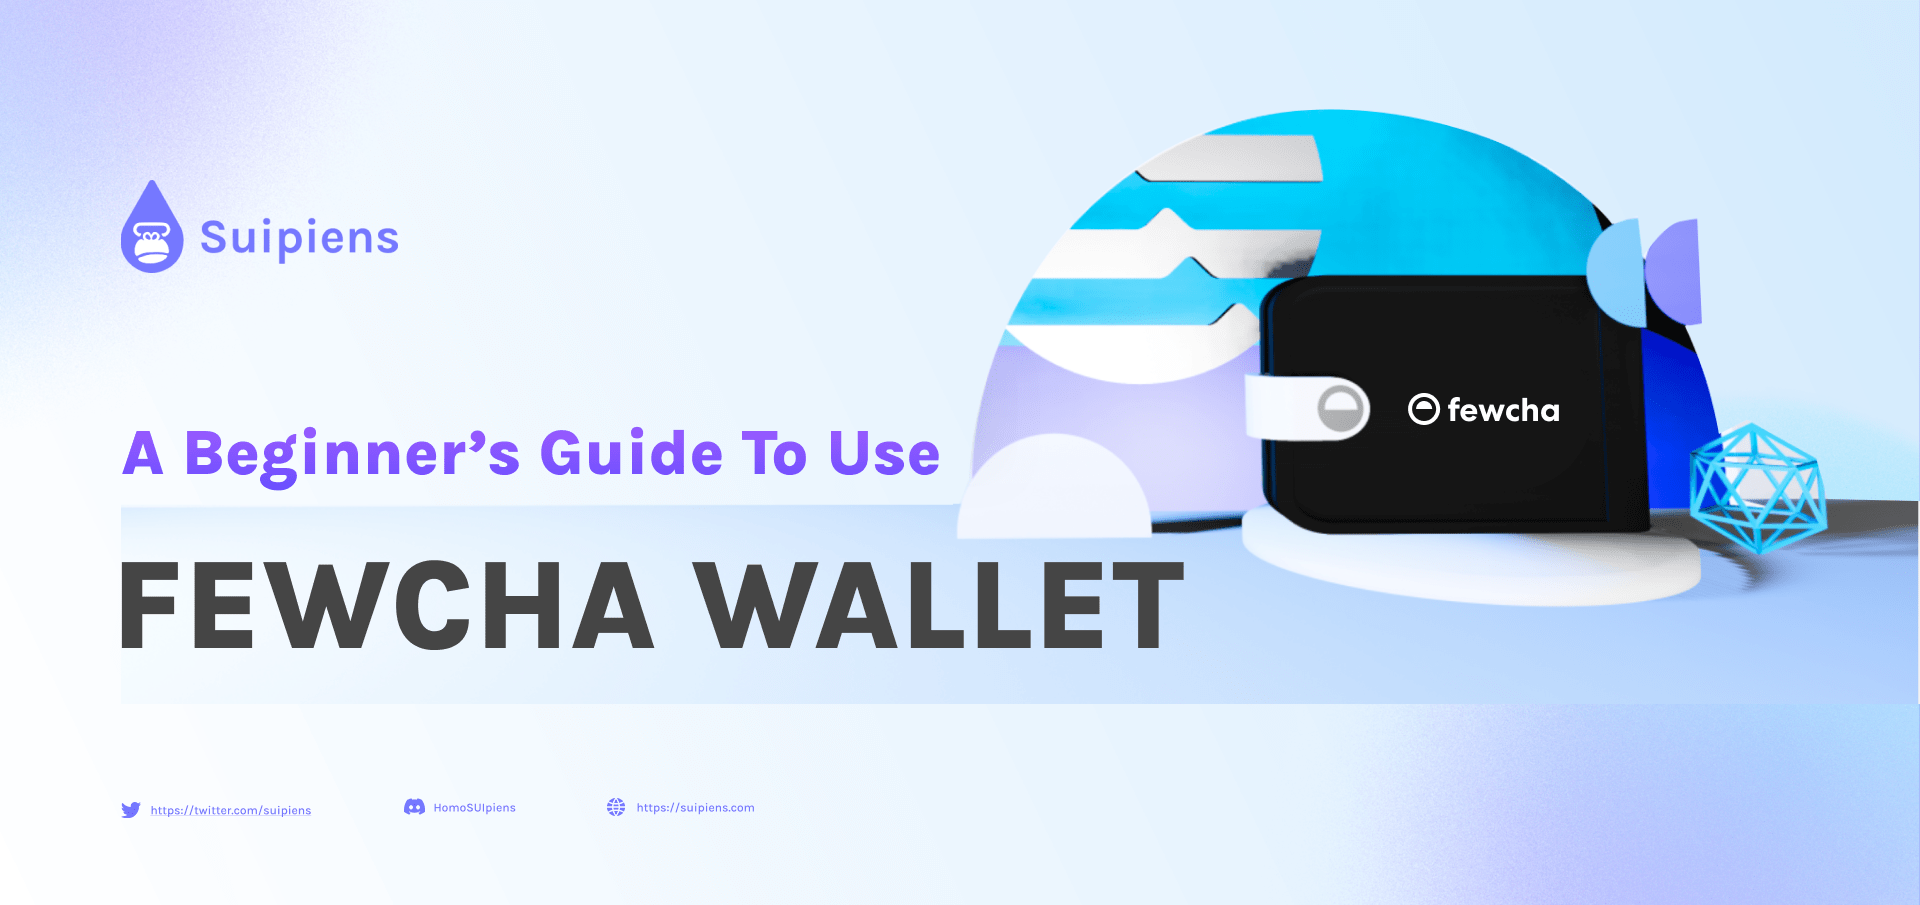 A Beginner’s Guide To Use Fewcha Wallet